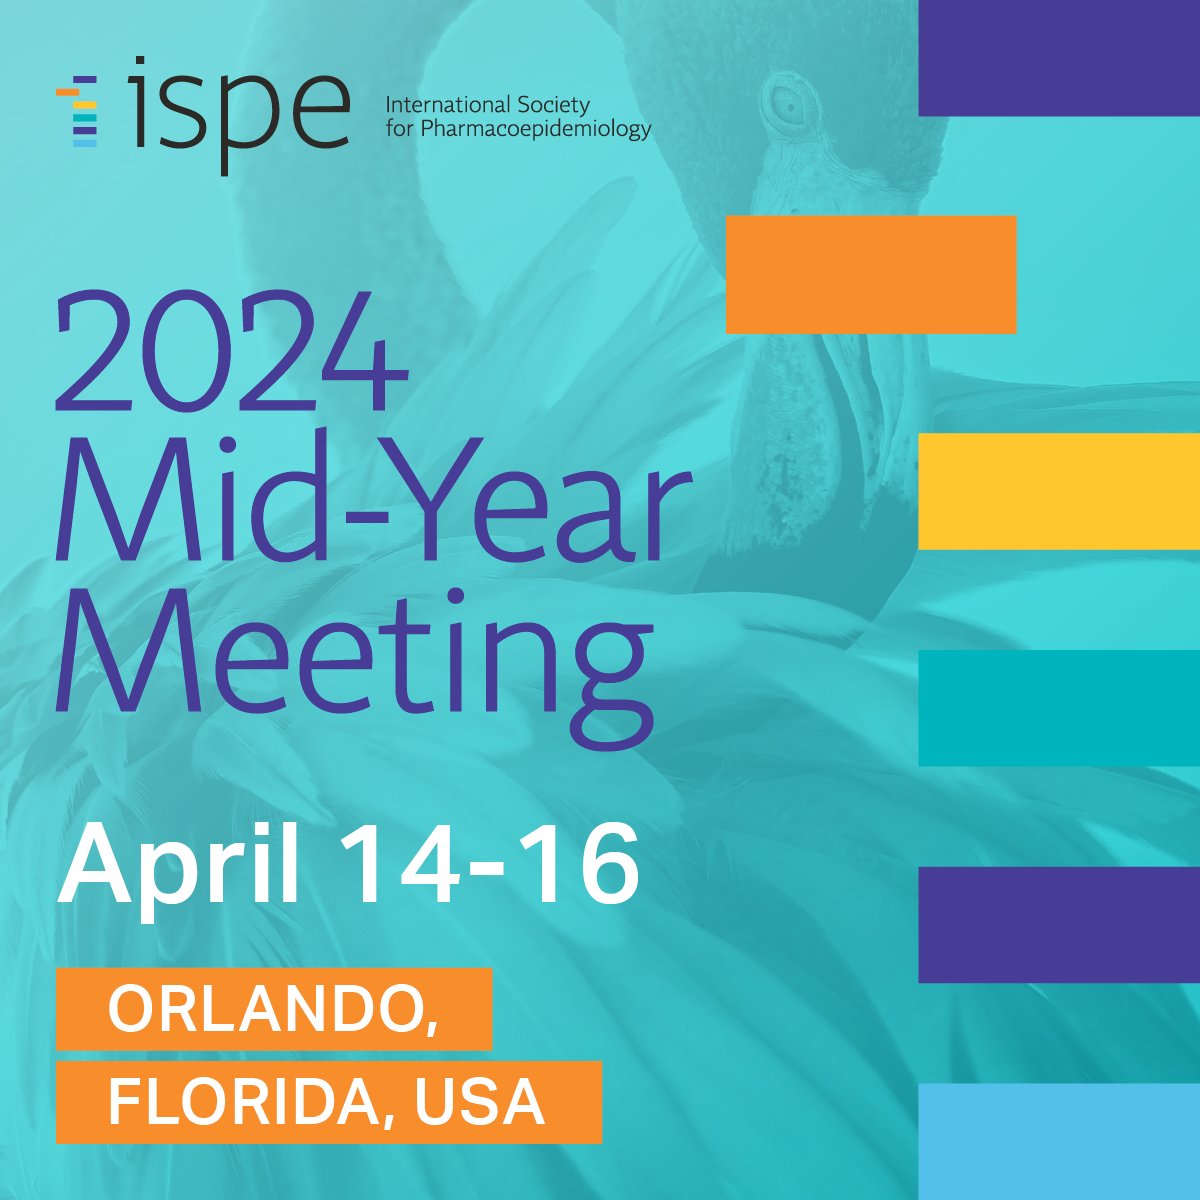 Join us for our 2024 Mid-Year Meeting in Orlando, Florida, April 14-16. Registration is now open for this exciting event focused on expanding #Pharmacoepidemiology to meet emerging global challenges. Register now: bit.ly/495eUMF #PharmEpi #EpiTwitter